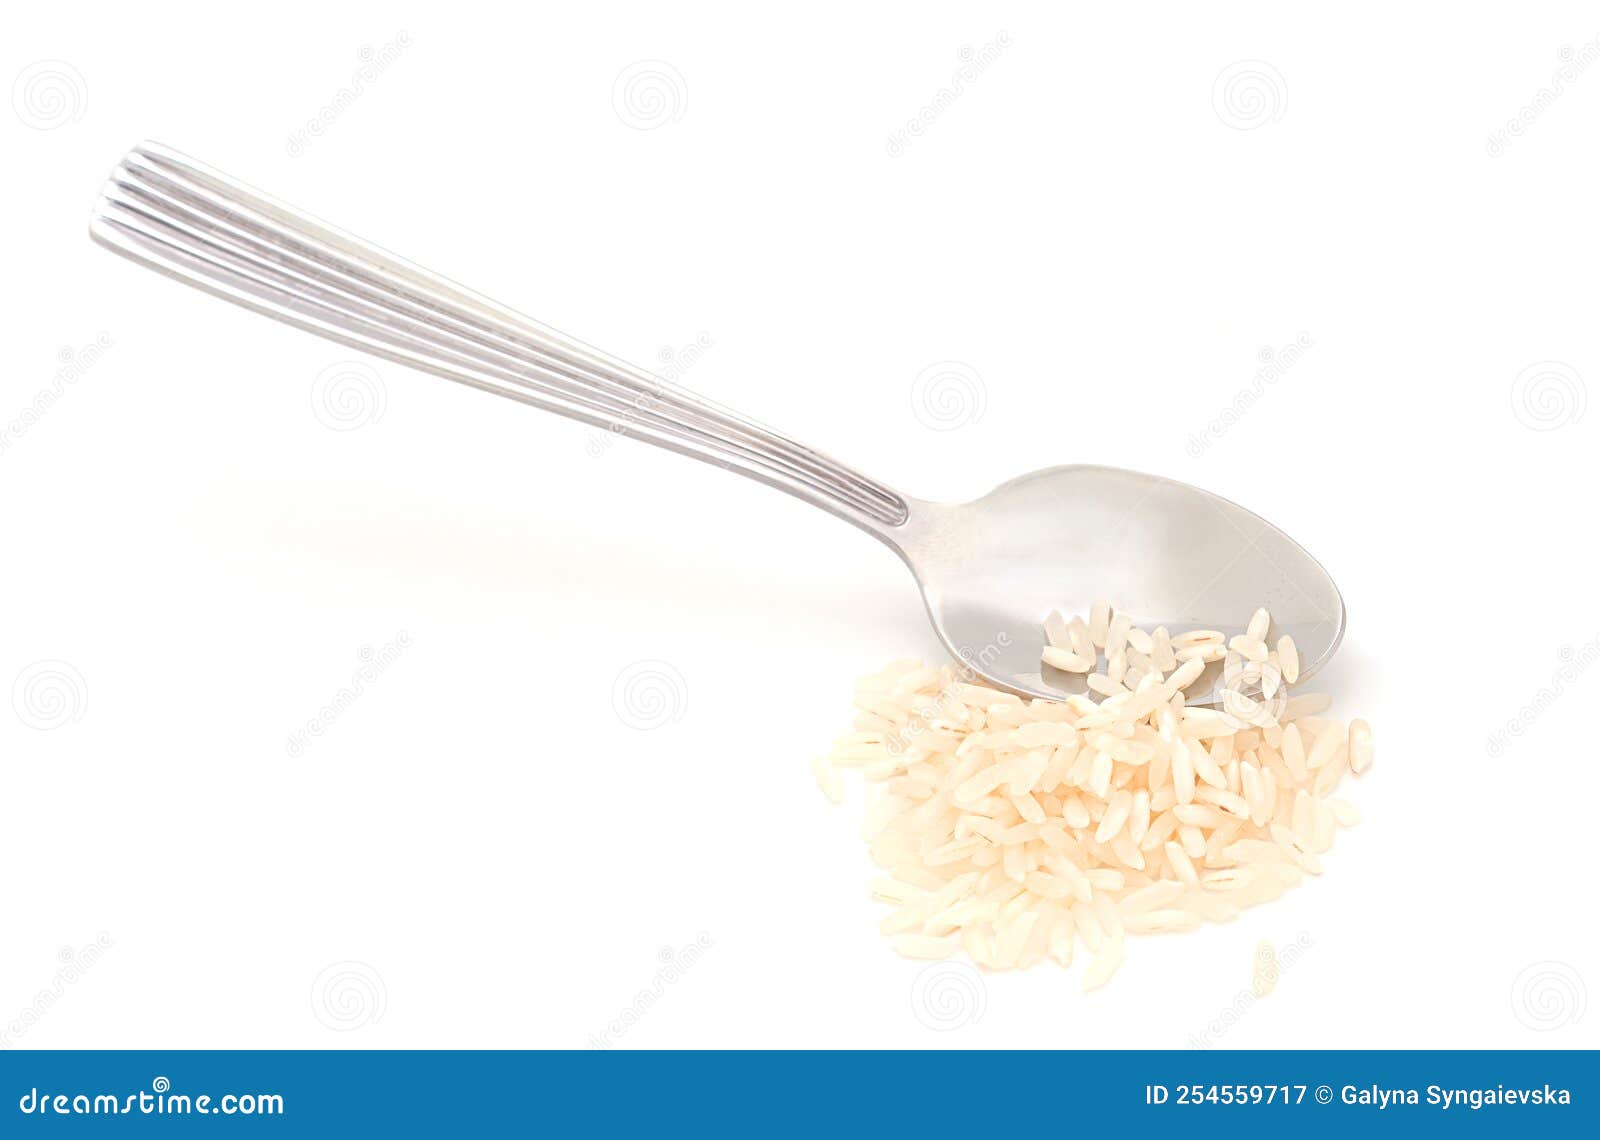 silver spoon and handful of rice